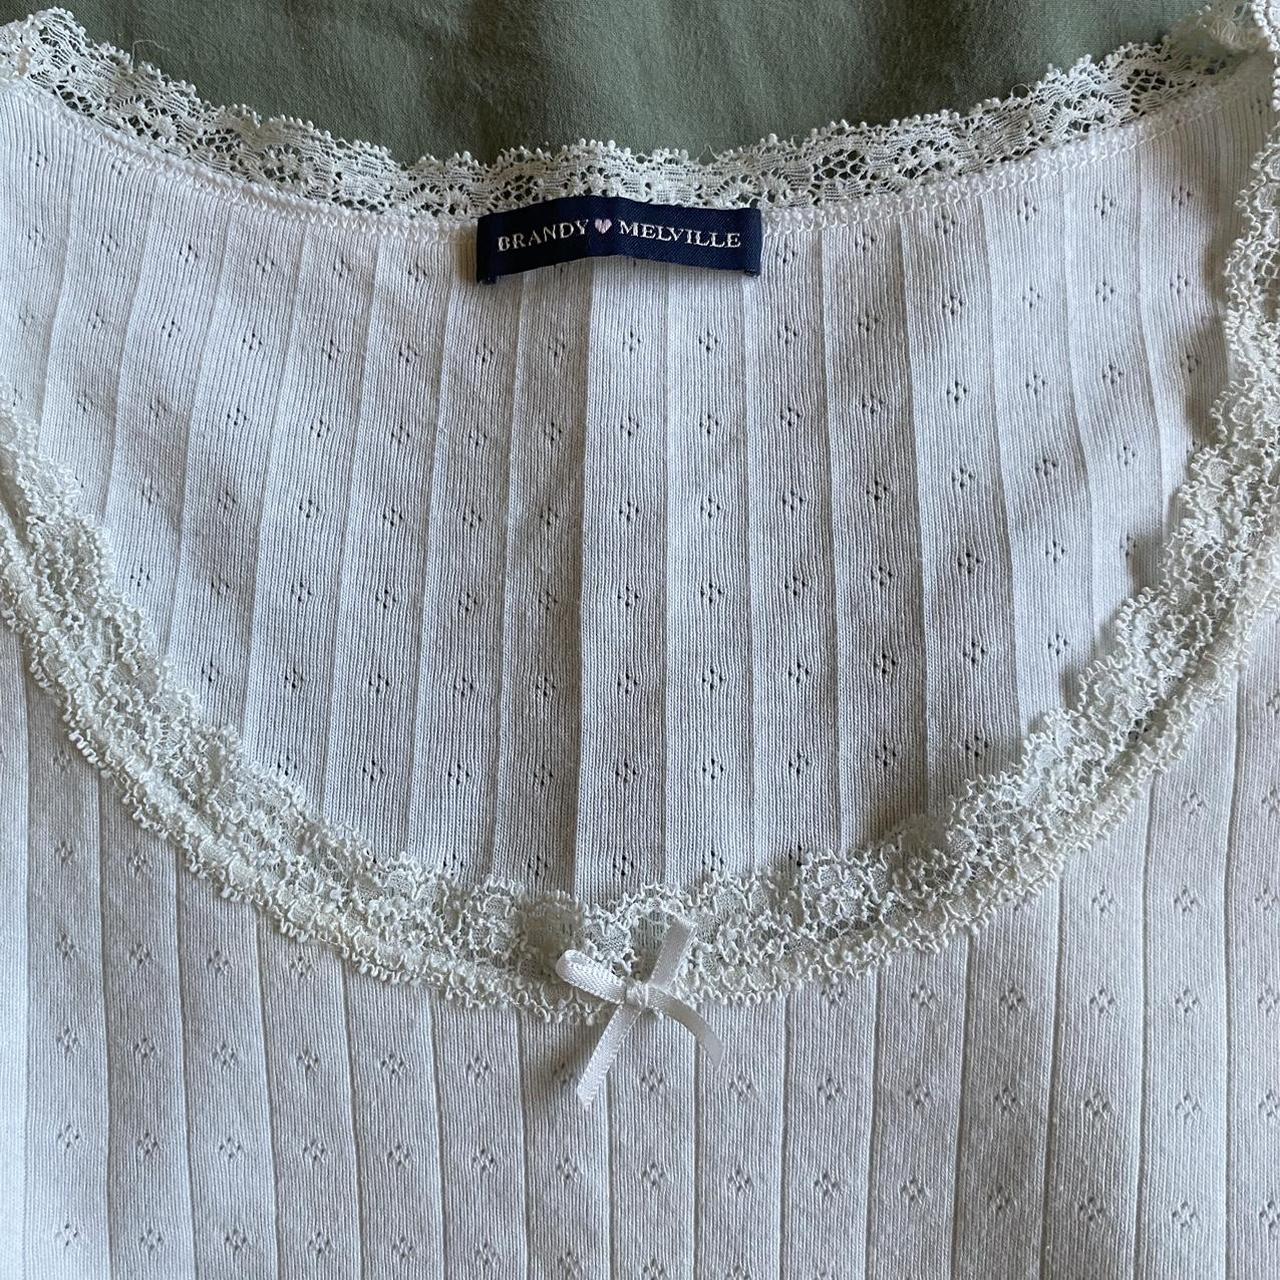 Does anyone know if the McKenna eyelet top is see through? It